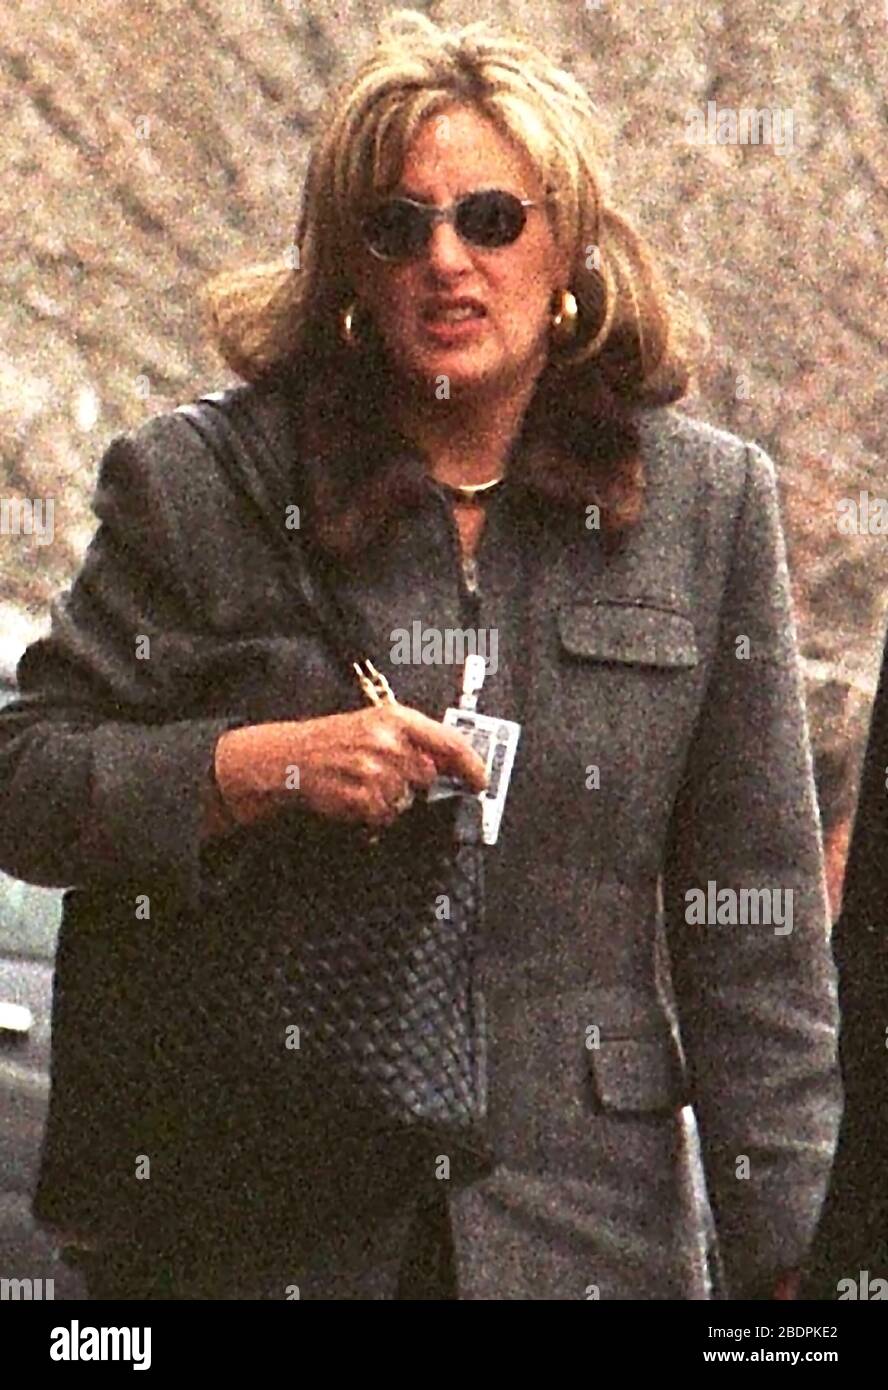 08 April 2020 - Linda Tripp, the former White House employee who became a key figure in the impeachment of President Bill Clinton, died at age 70 from pancreatic cancer. She secretly recorded Monica Lewinsky revealing she was having an affair with Clinton. Linda Tripp (wearing a gray jacket) with unidentified people on Wilson Blvd in front of the building where she now works in Arlington, Virginia on 3 March, 1999. Credit: Ron Sachs / CNP/AdMedia Photo via Newscom Stock Photo